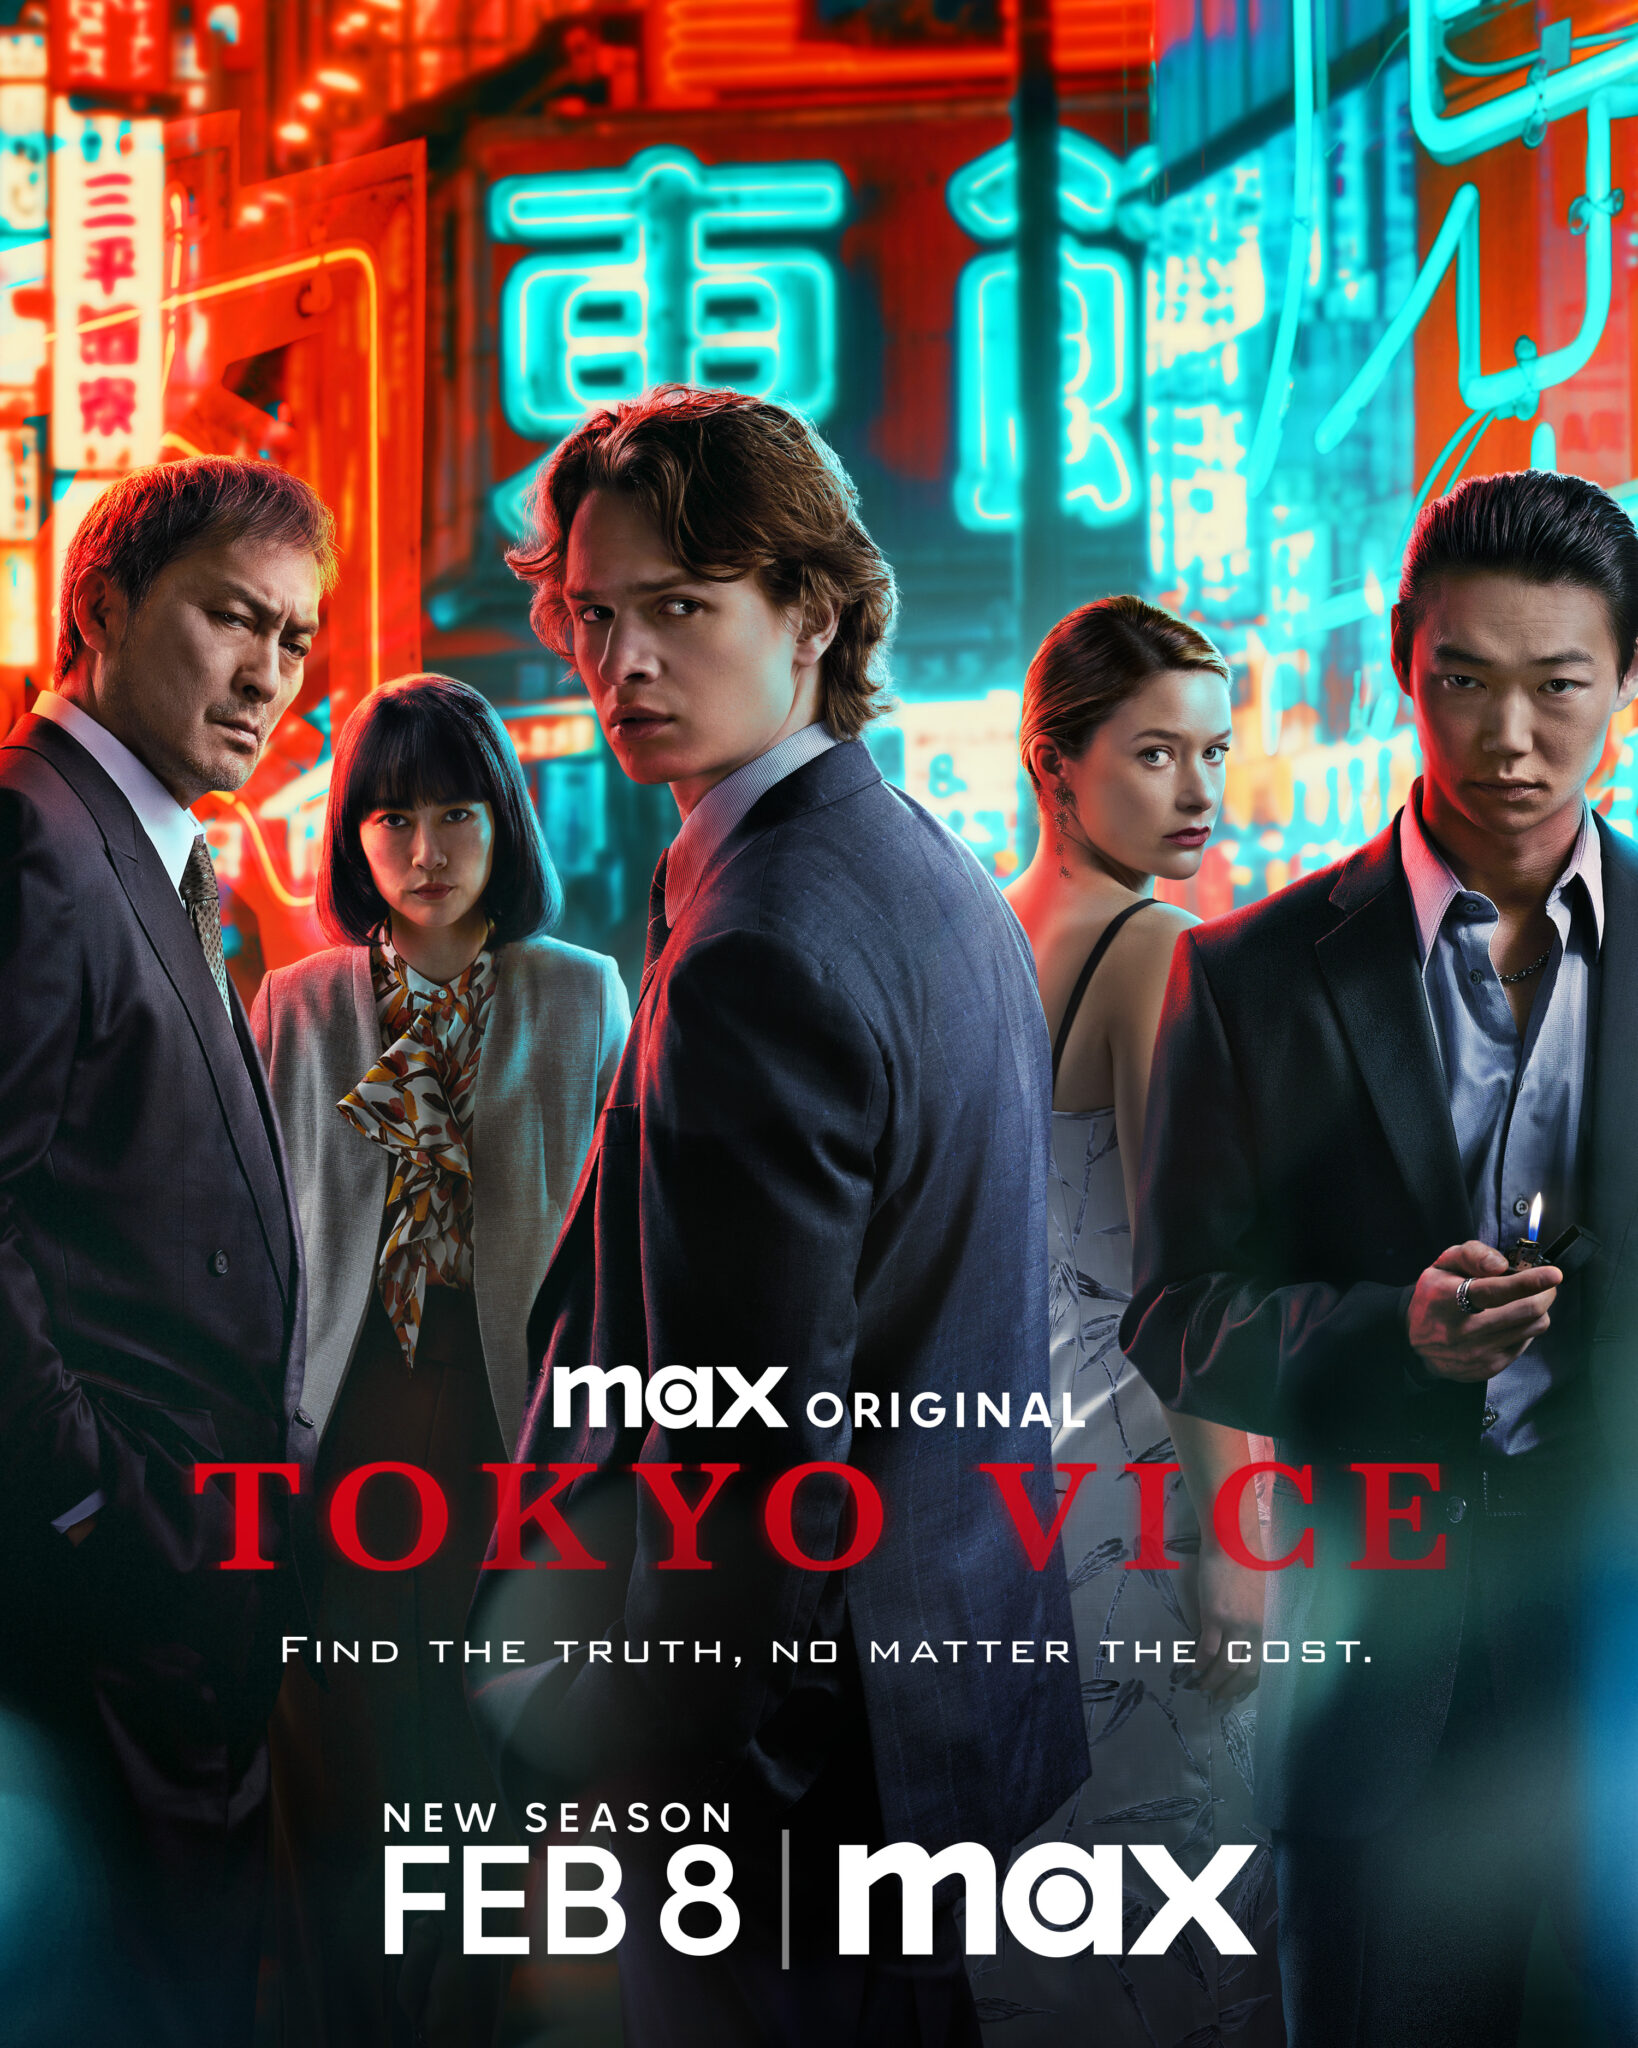 Tokyo Vice Season 2 Episodes 1 2 Review Ansel Elgort And Ken Watanabe Are Back With A Promising 